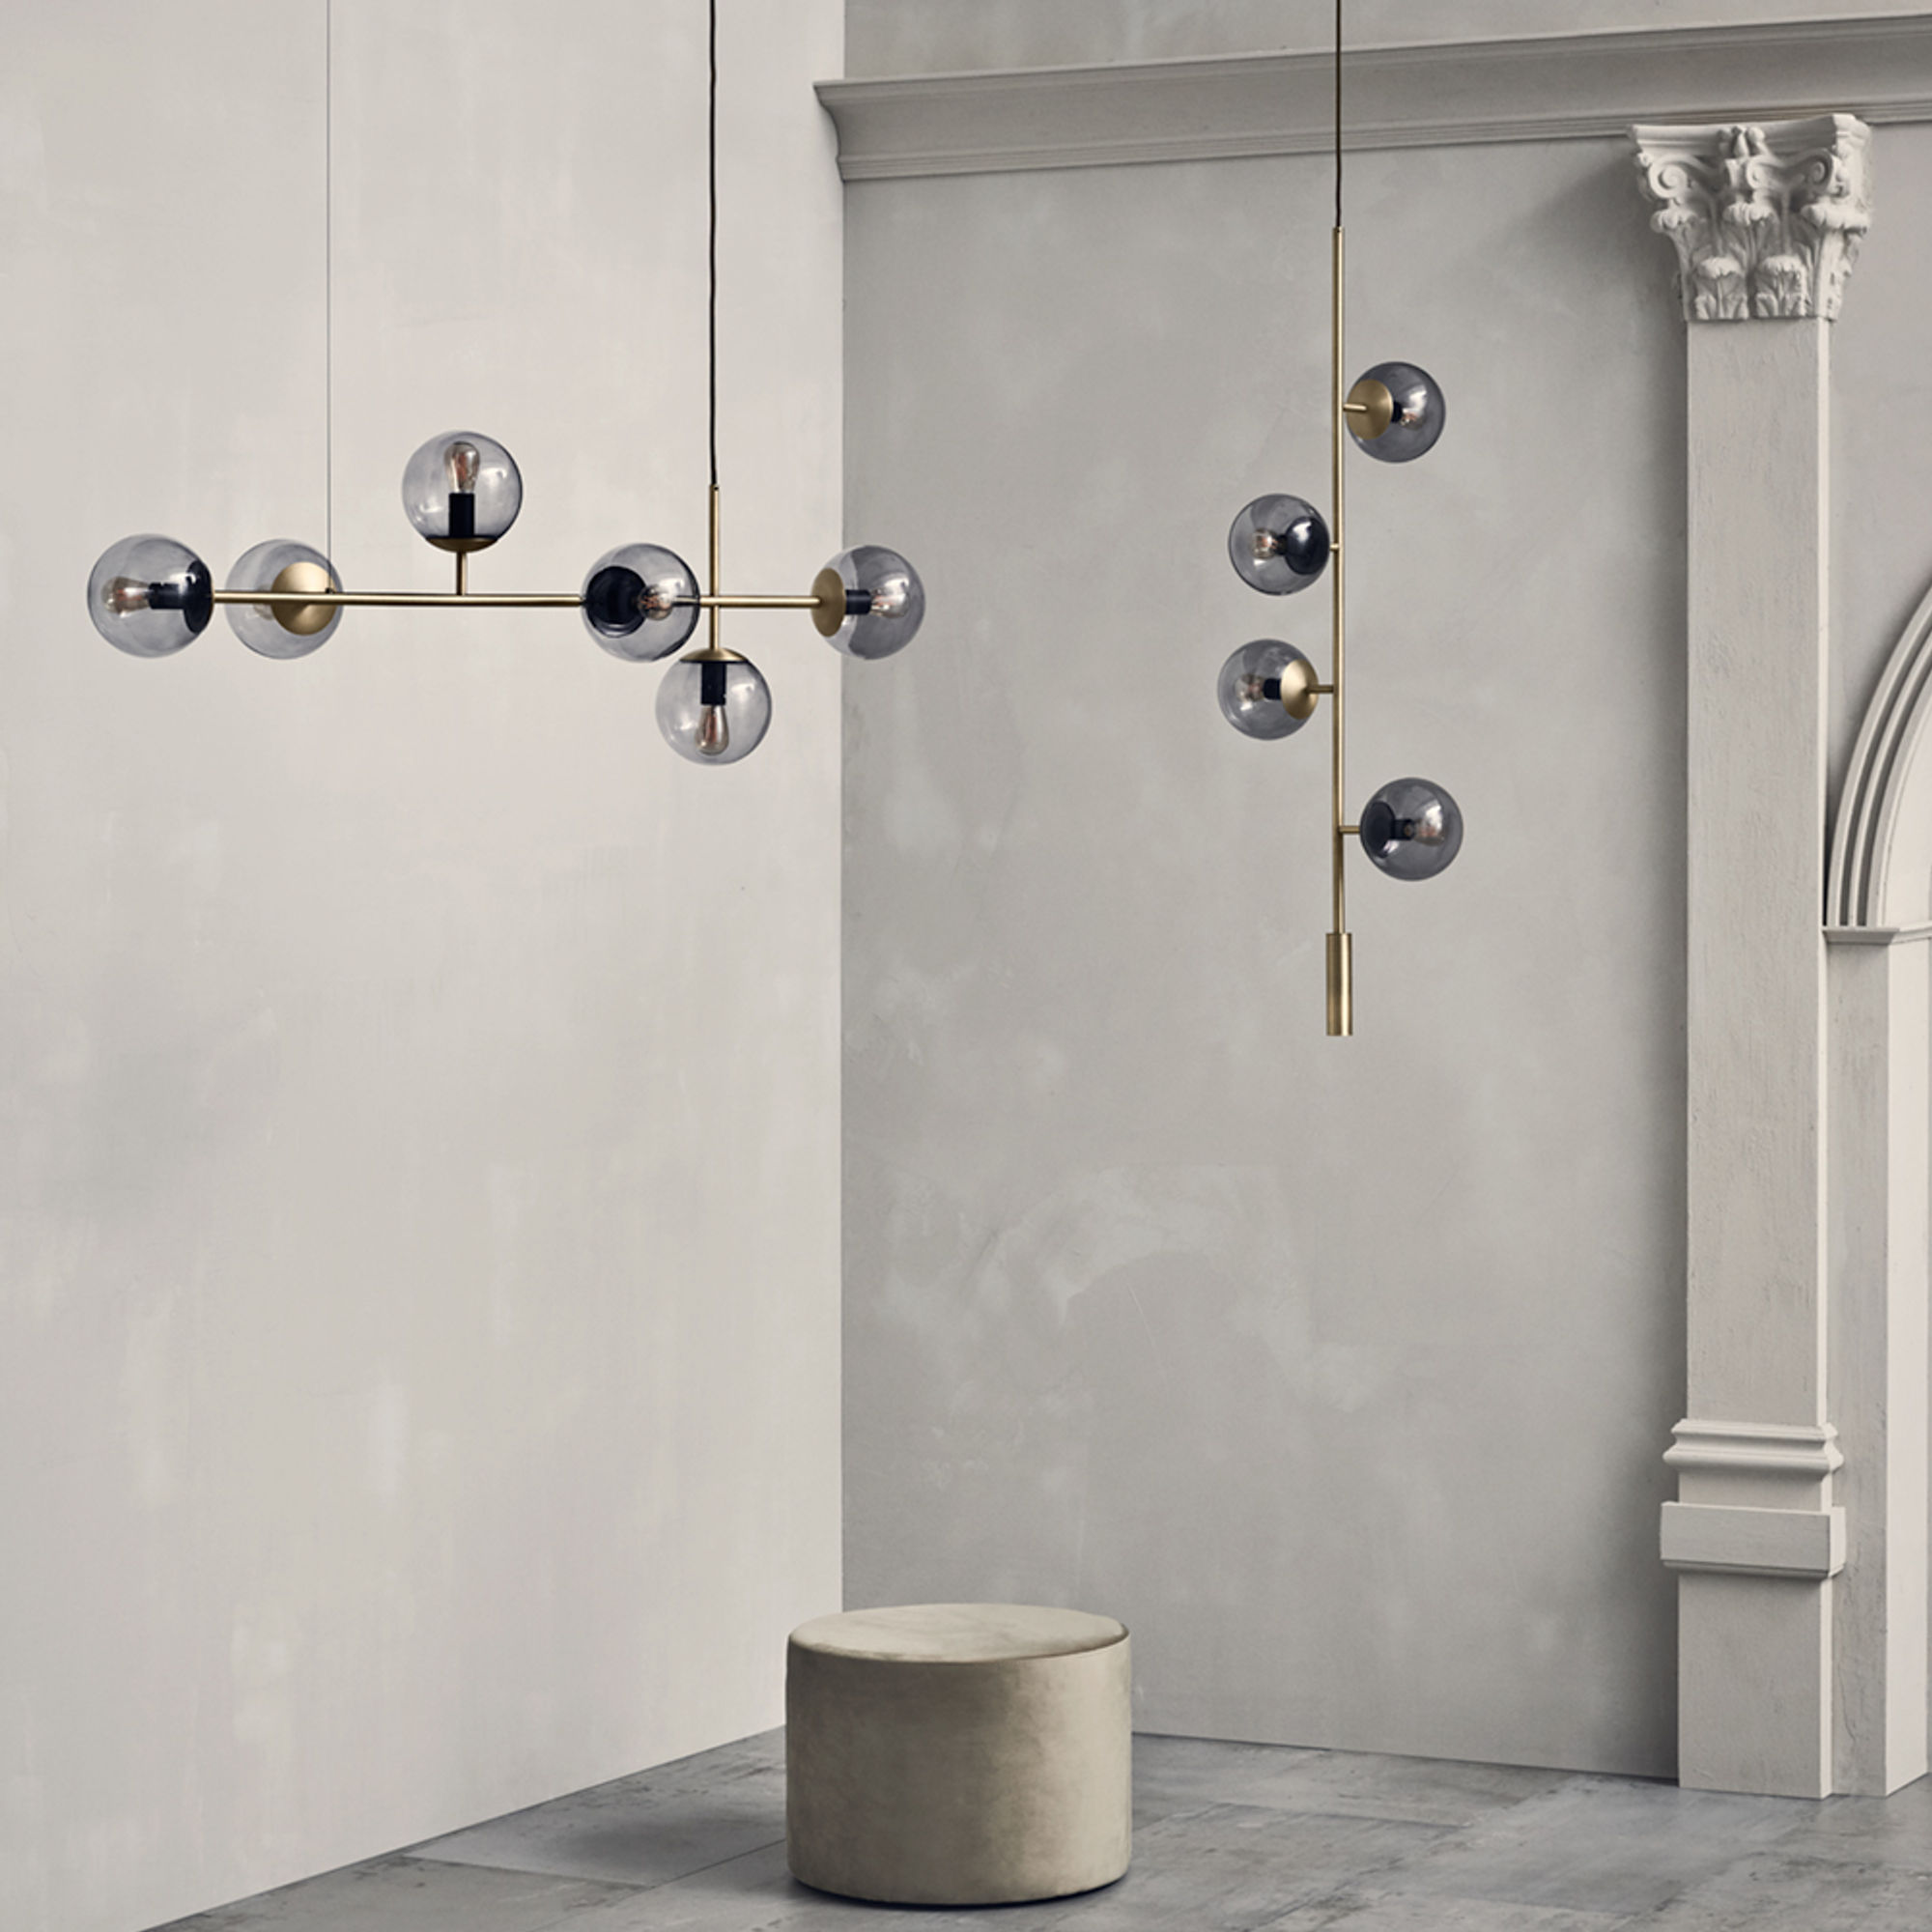 The Orb Lounge Pendant by Bolia 7